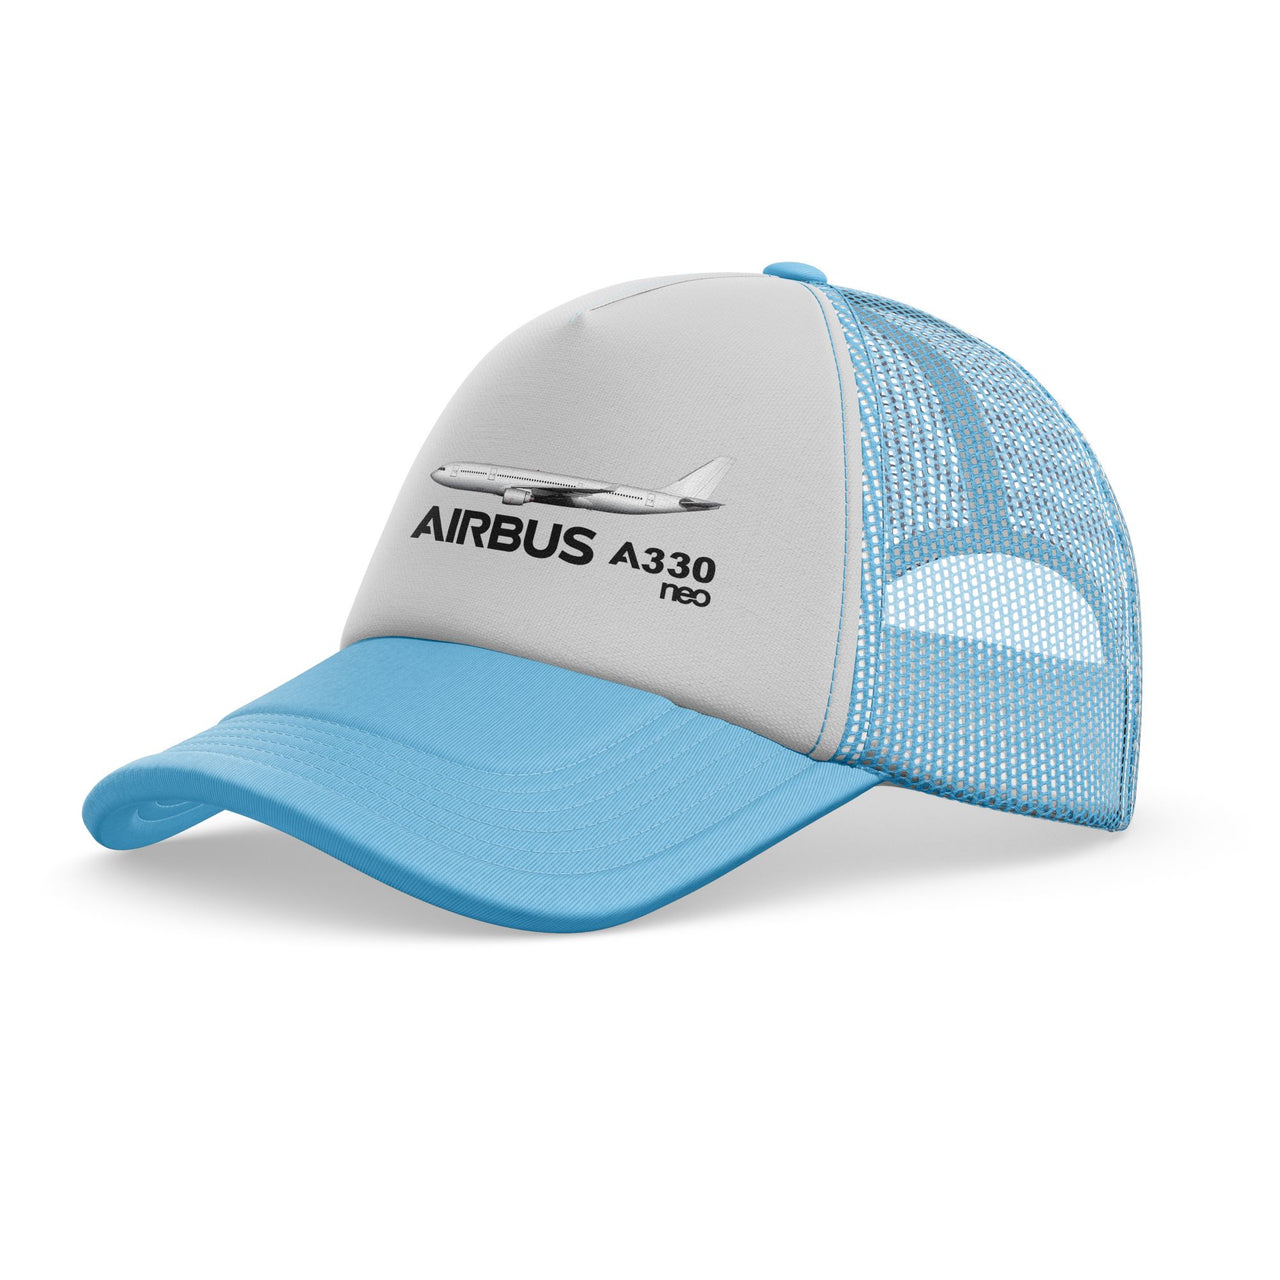 The Airbus A330neo Designed Trucker Caps & Hats